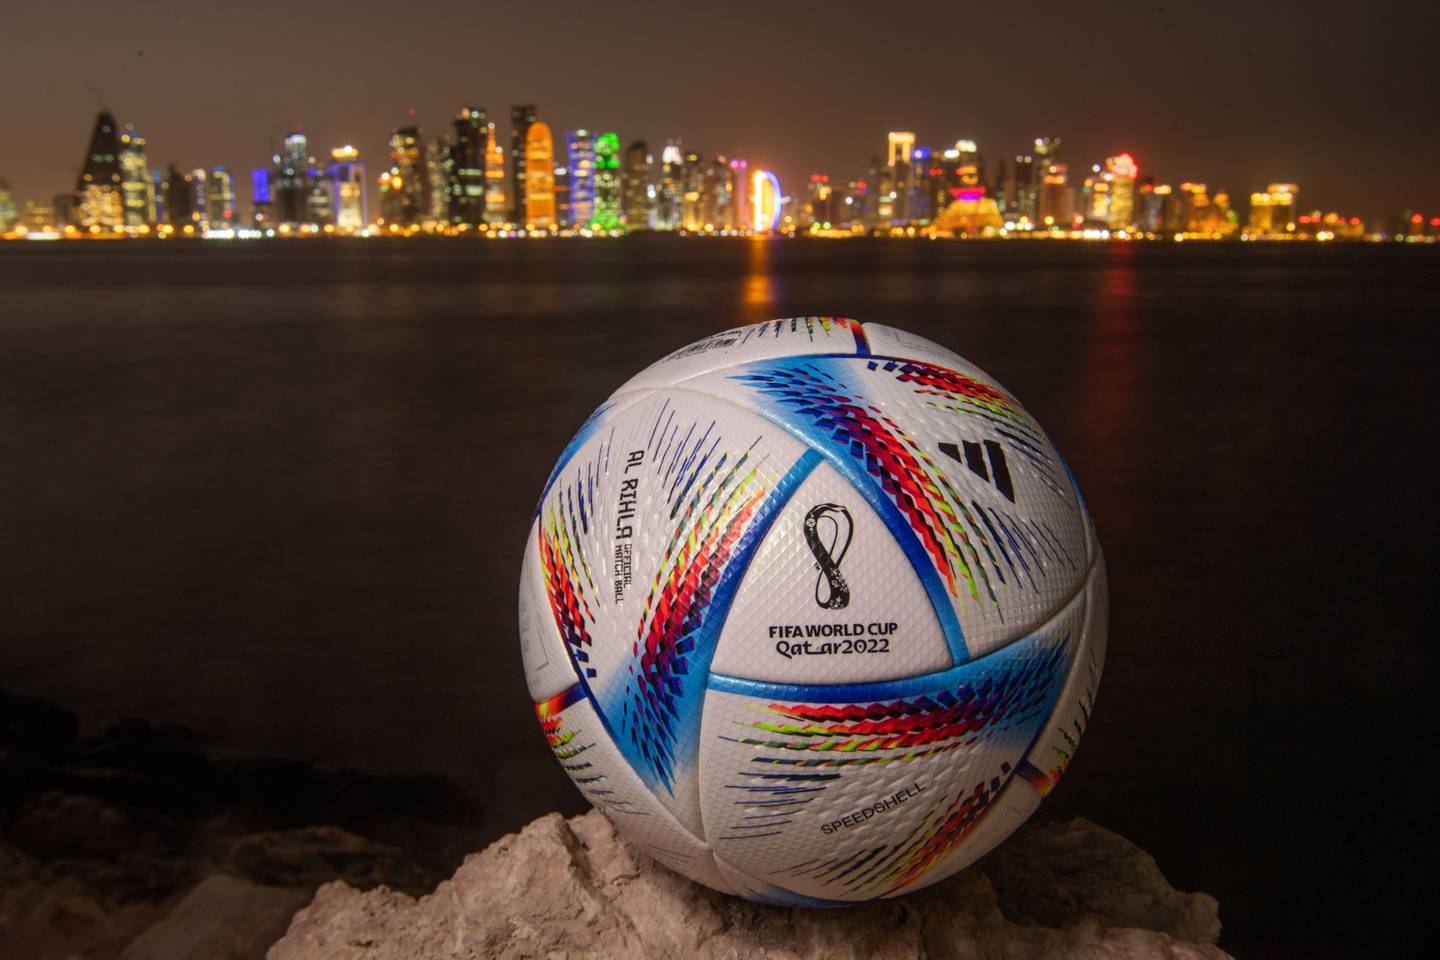 In this photo, an official FIFA World Cup Qatar 2022 ball sits on display in front of the skyline of Doha.